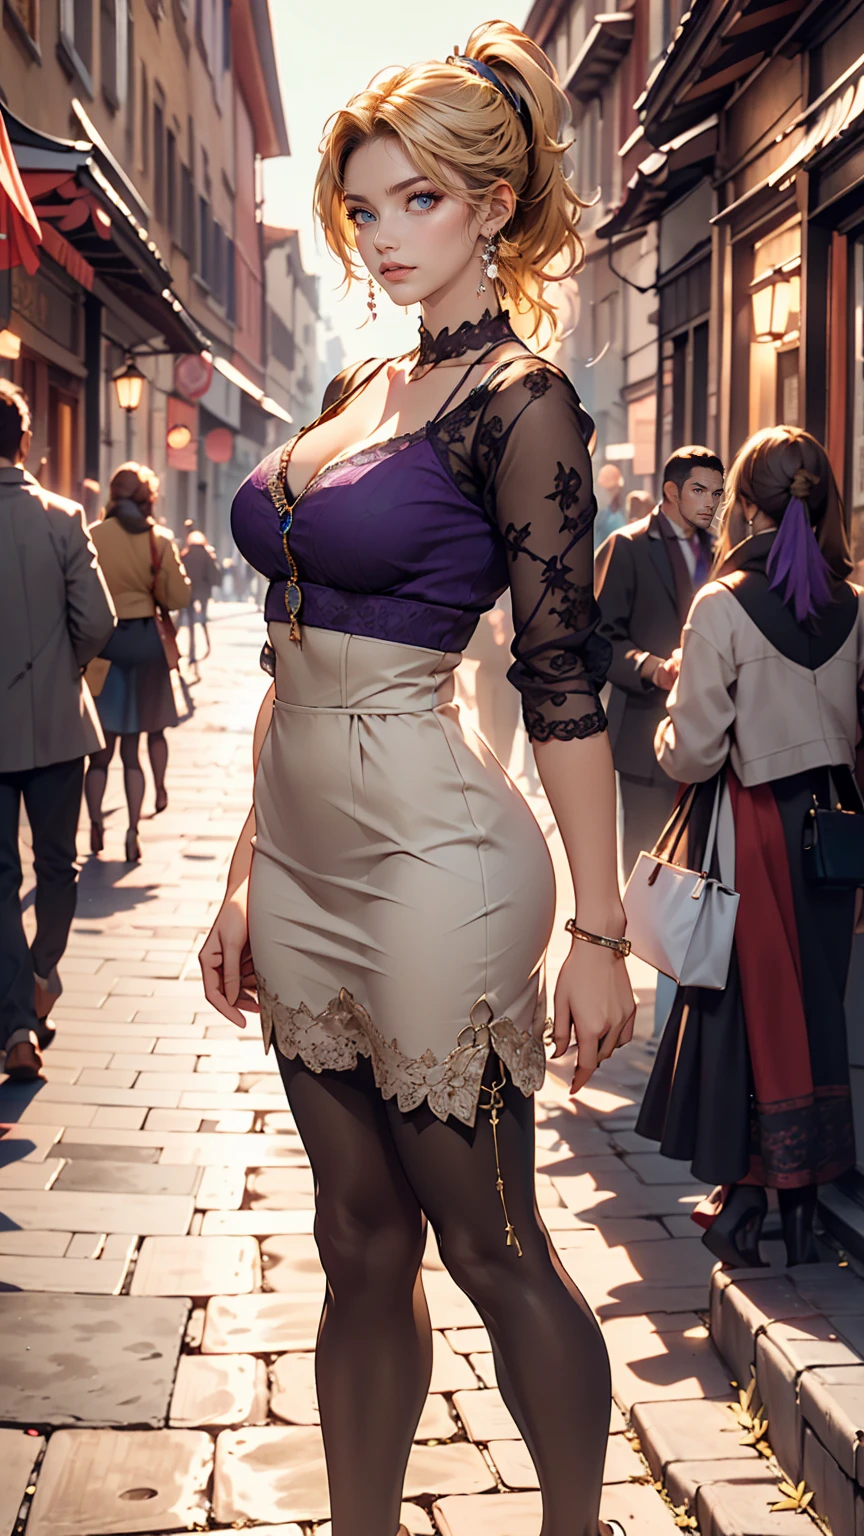 Very beautiful 22 year old Caucasian woman、Supermodel proportions、Hair Color: Blonde、Blue Idium Hair、Straight hair、Purple inner color((Inner hair color))、Split Ponytail((Split Ponytail))、Wear a high-necked zippered dress、Large Breasts、Tight waist、Wear leggings、Wearing high heels、In the cobblestone streets of the old town